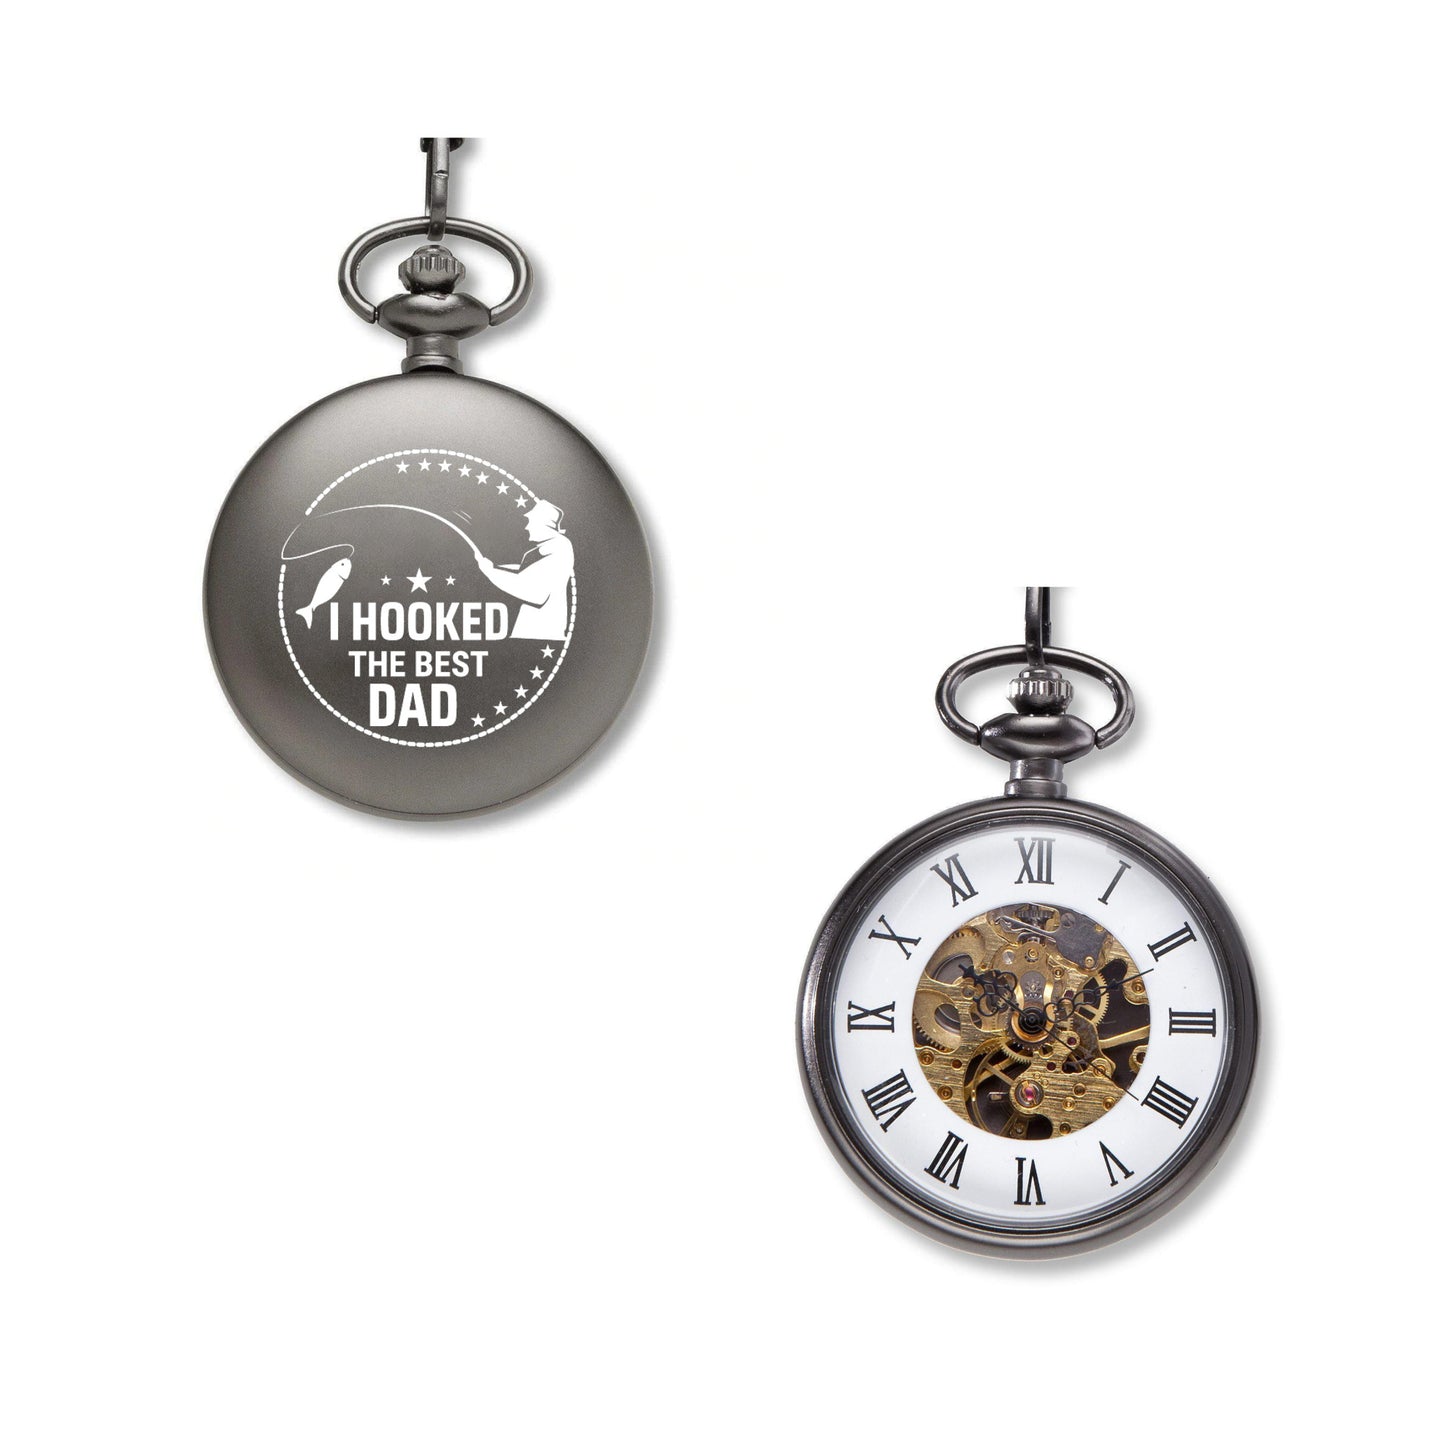 I Hooked The Best Dad Engraved Pocket Watch